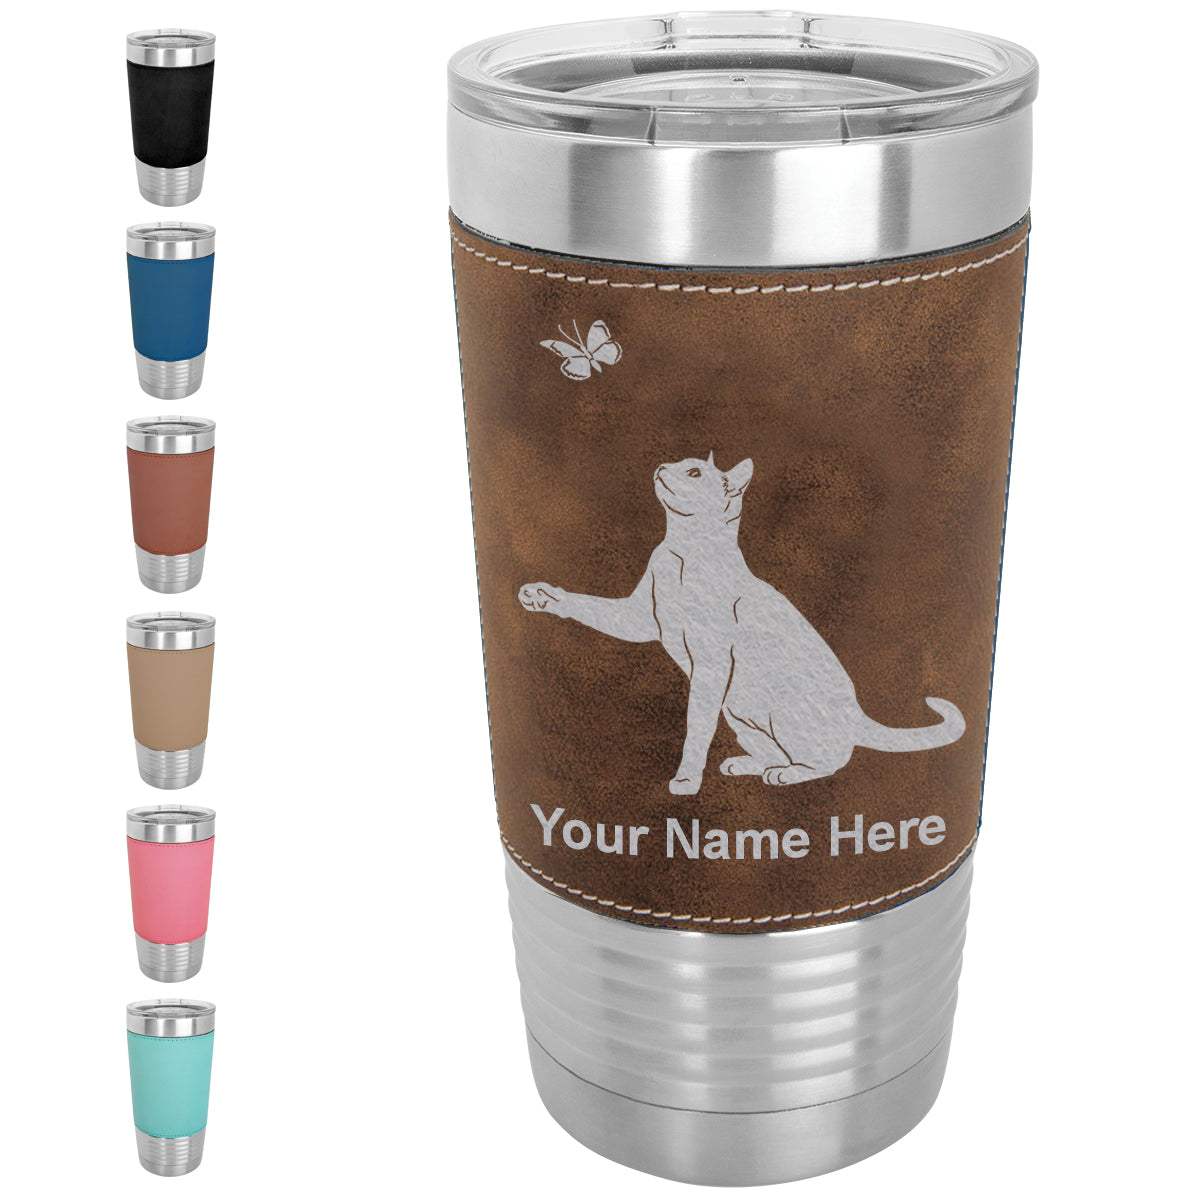 20oz Faux Leather Tumbler Mug, Cat with Butterfly, Personalized Engraving Included - LaserGram Custom Engraved Gifts